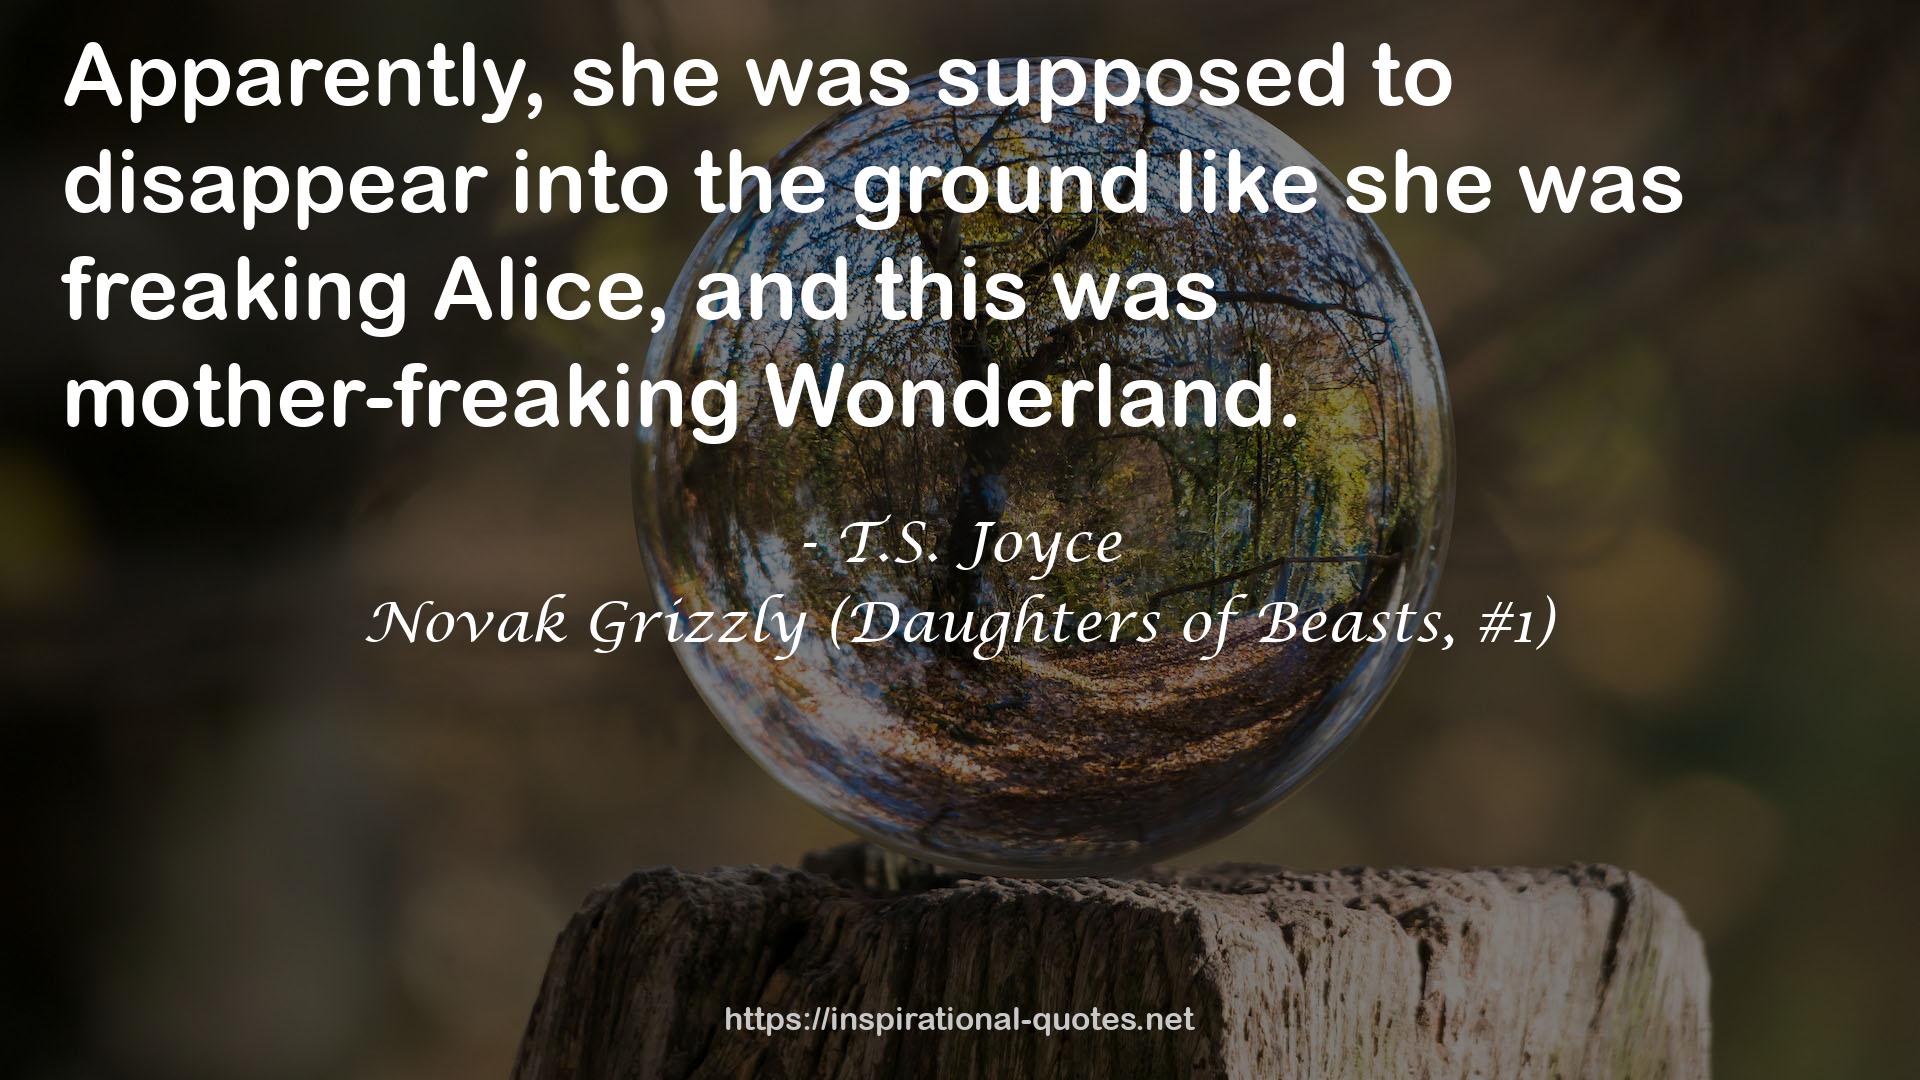 Novak Grizzly (Daughters of Beasts, #1) QUOTES